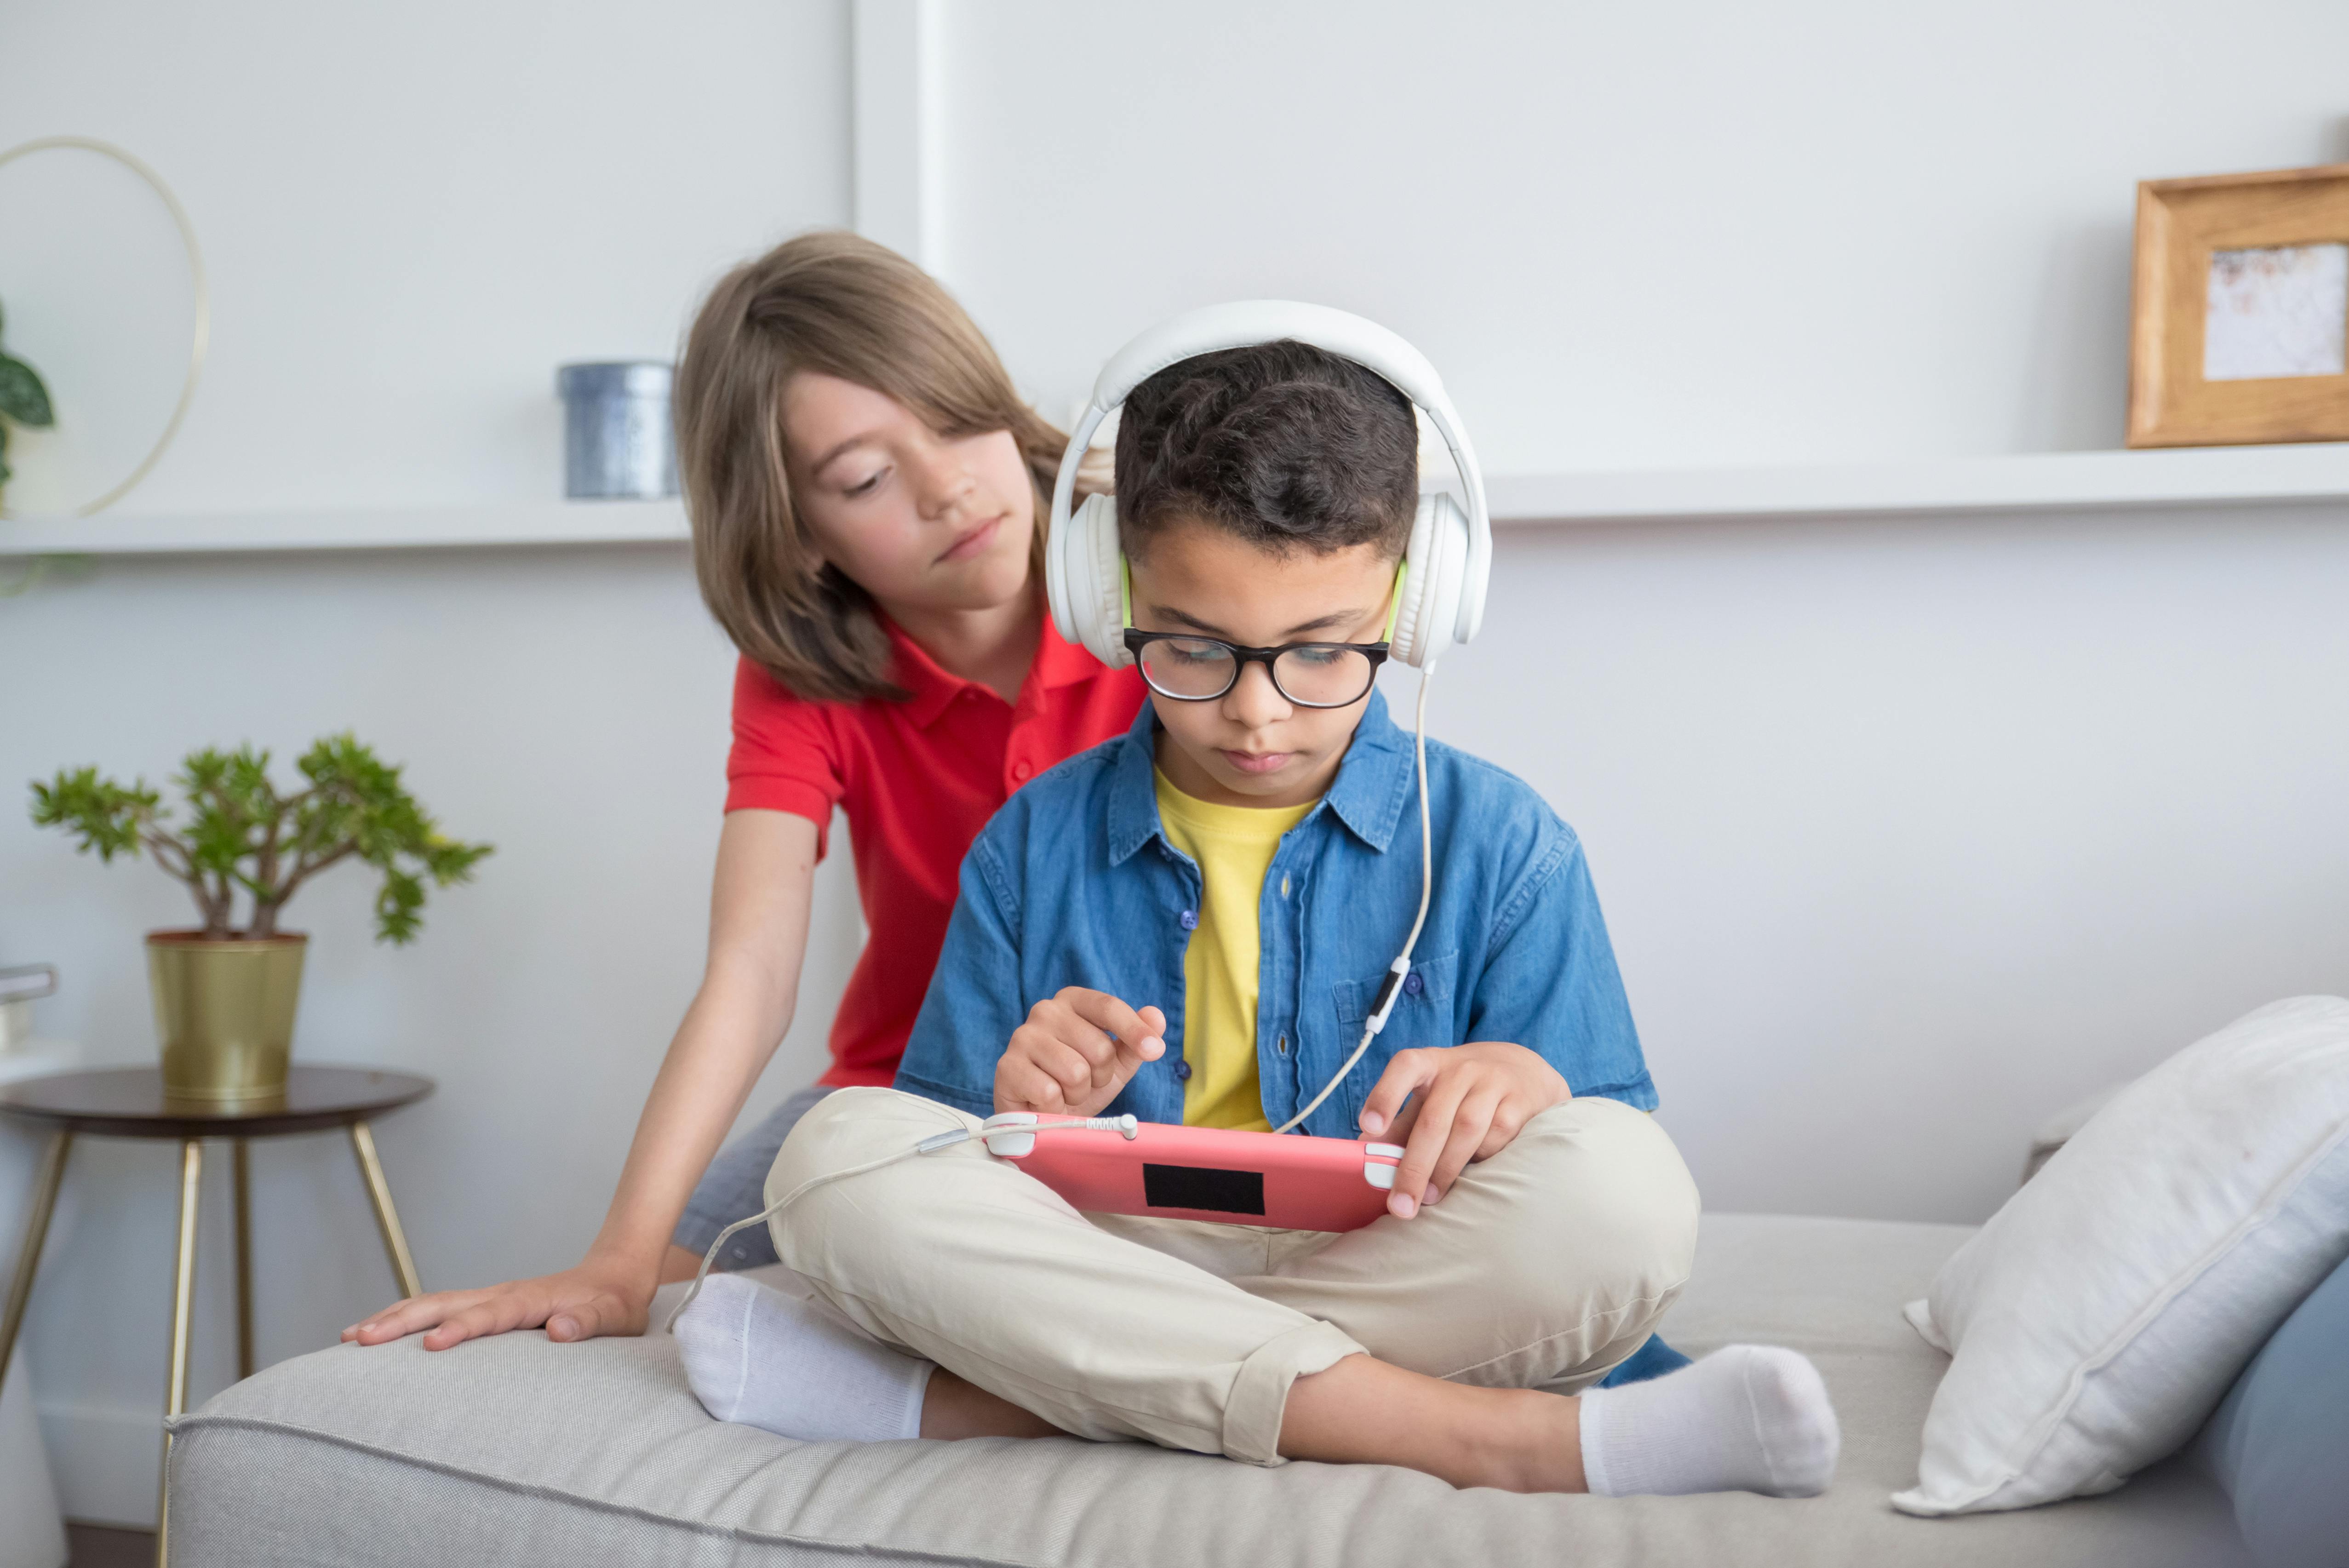 Kids Playing Video Games on a Tablet · Free Stock Photo